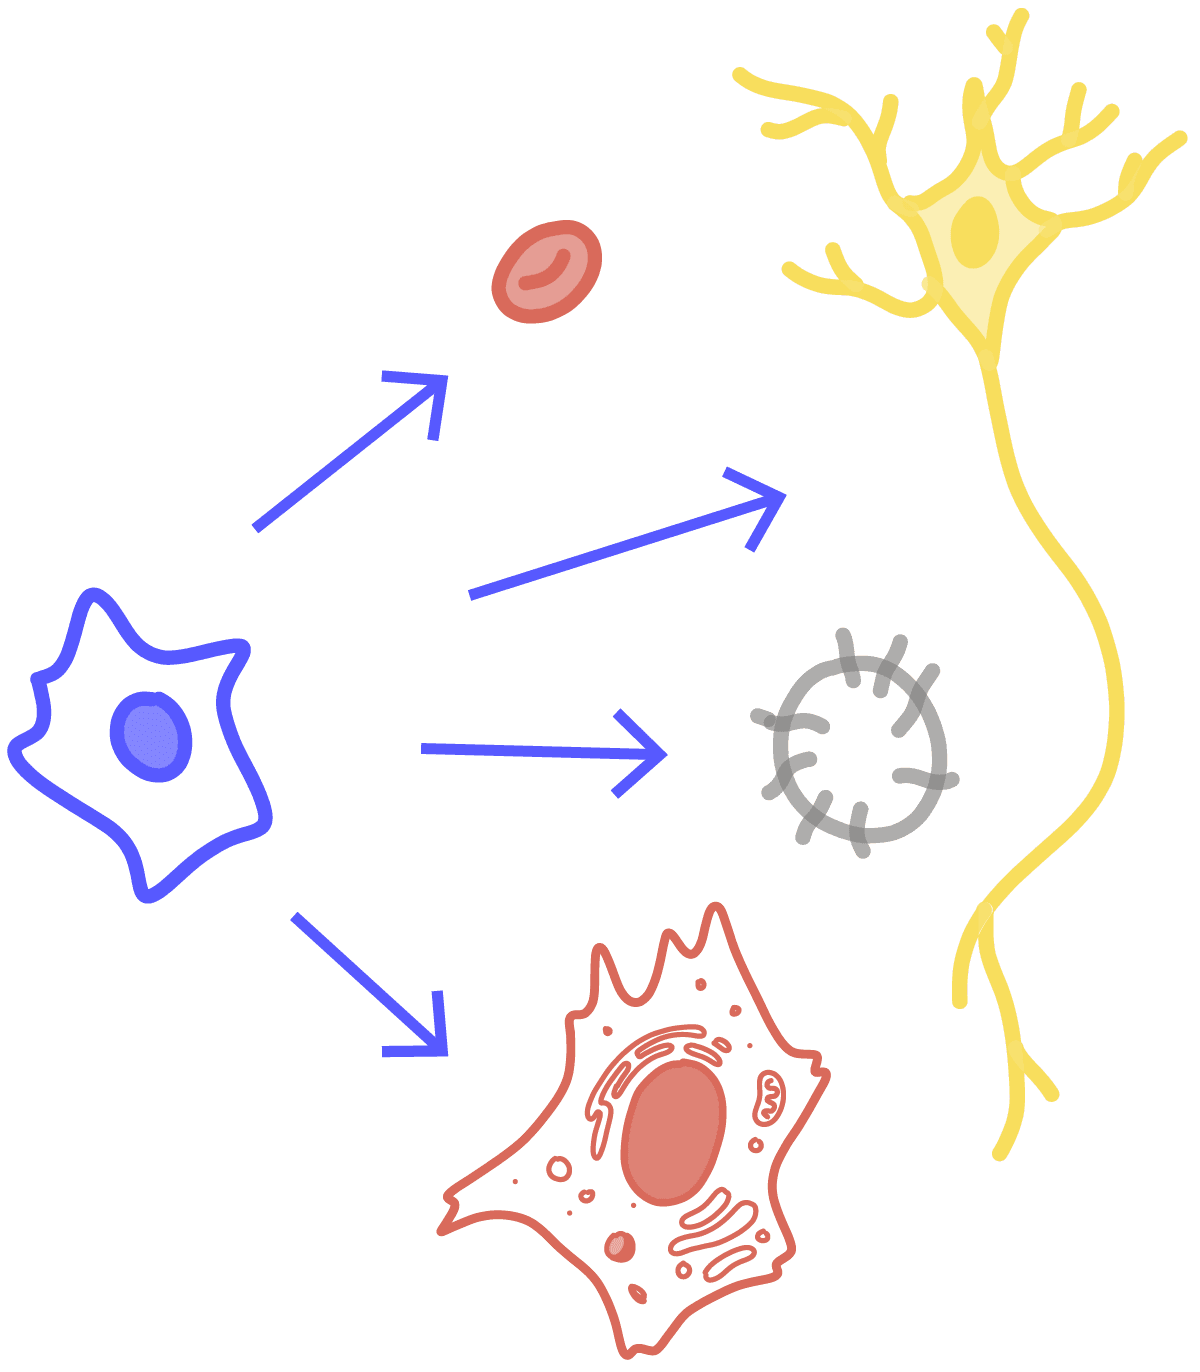 Image of a stem cell transforming into different types of cells including a red blood cell, a nerve cell, a somatic cell and a germ cell.